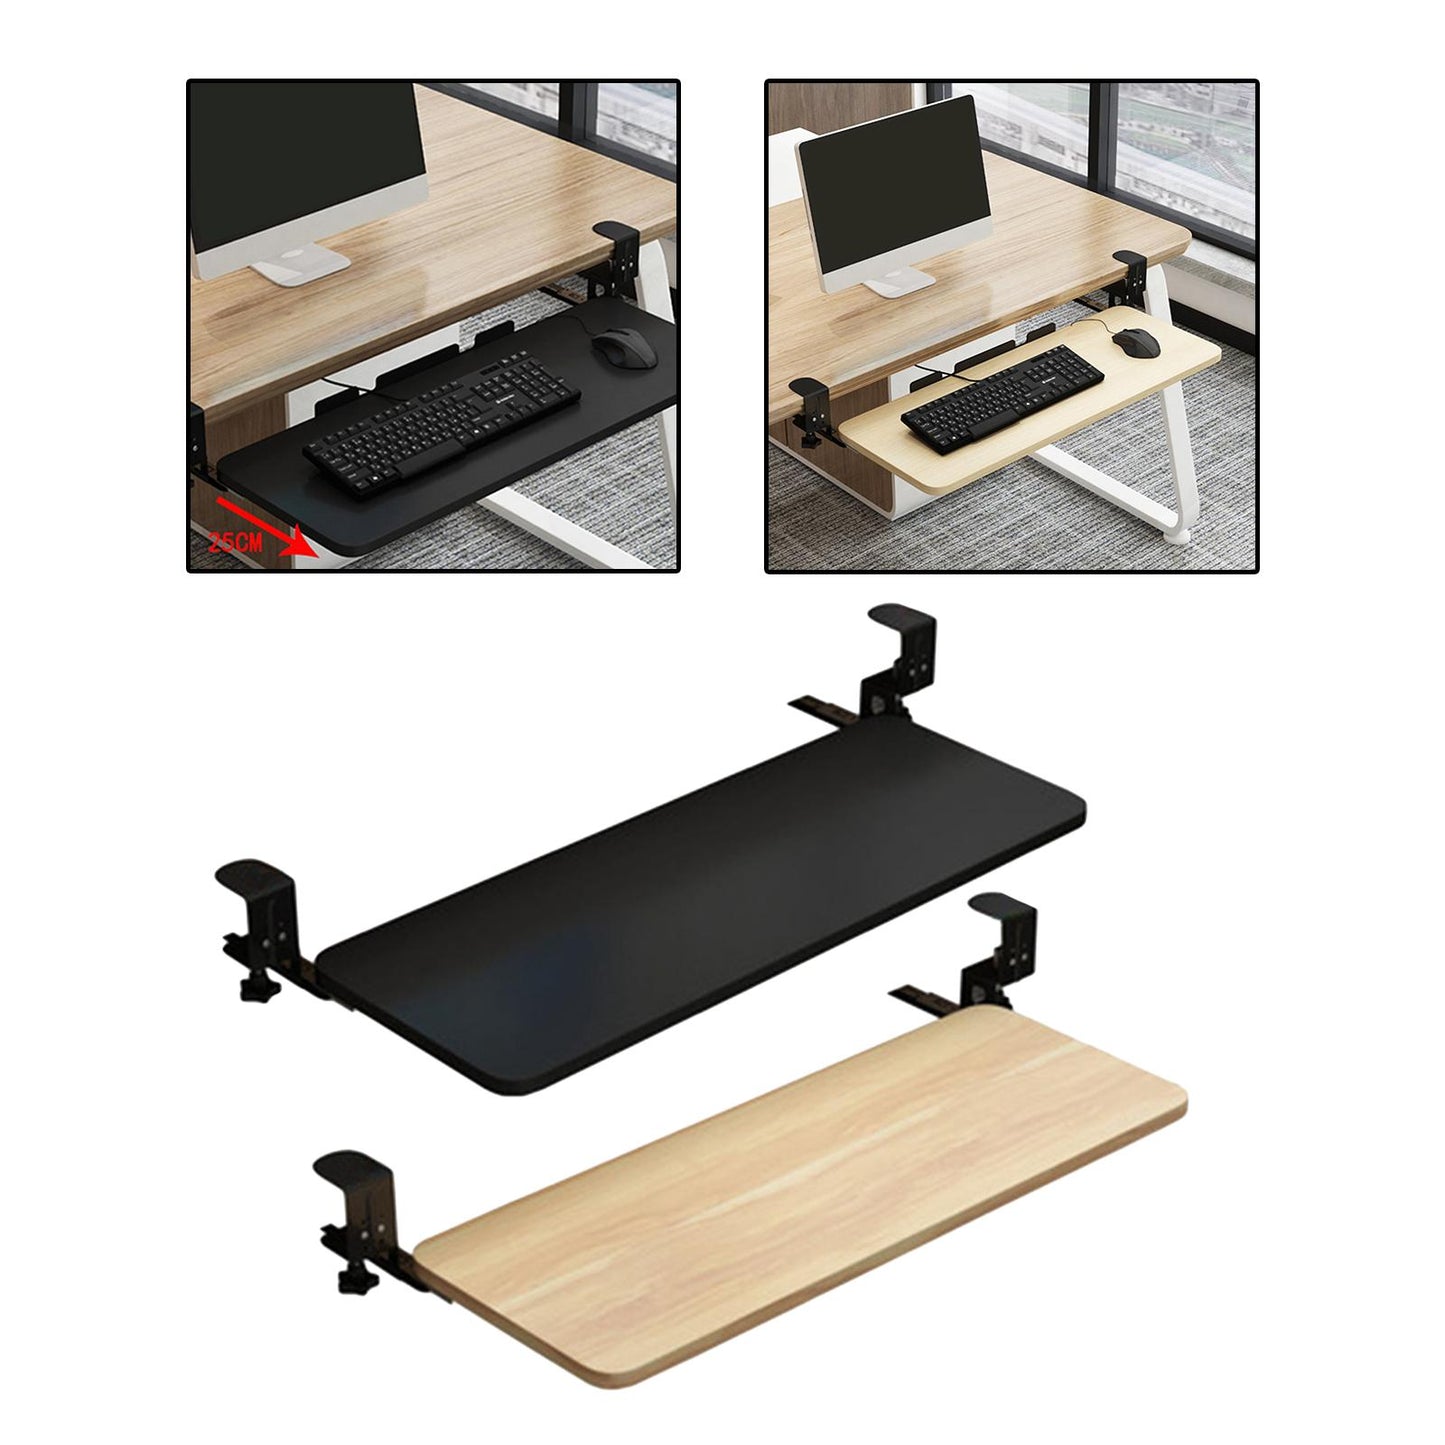 Large Keyboard Extension Tray Under Computer Table Pull Out Platform Ergonomic Bracket Mouse Pad Holder Clip for Typing Desktop